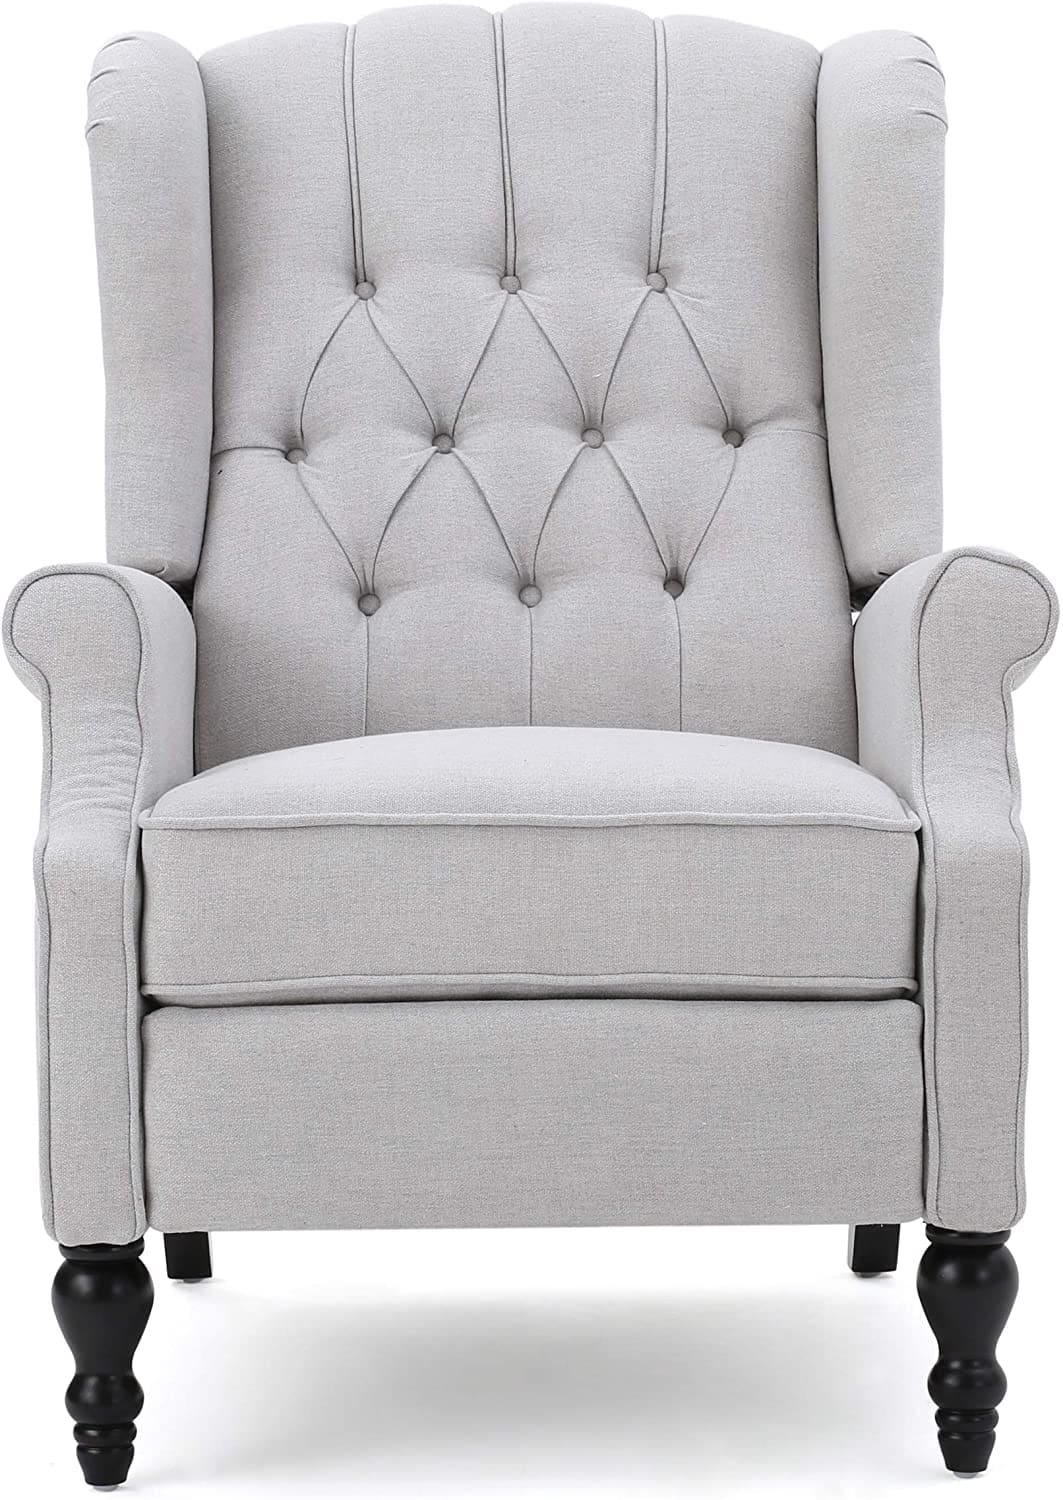 grey fabric recliner chair